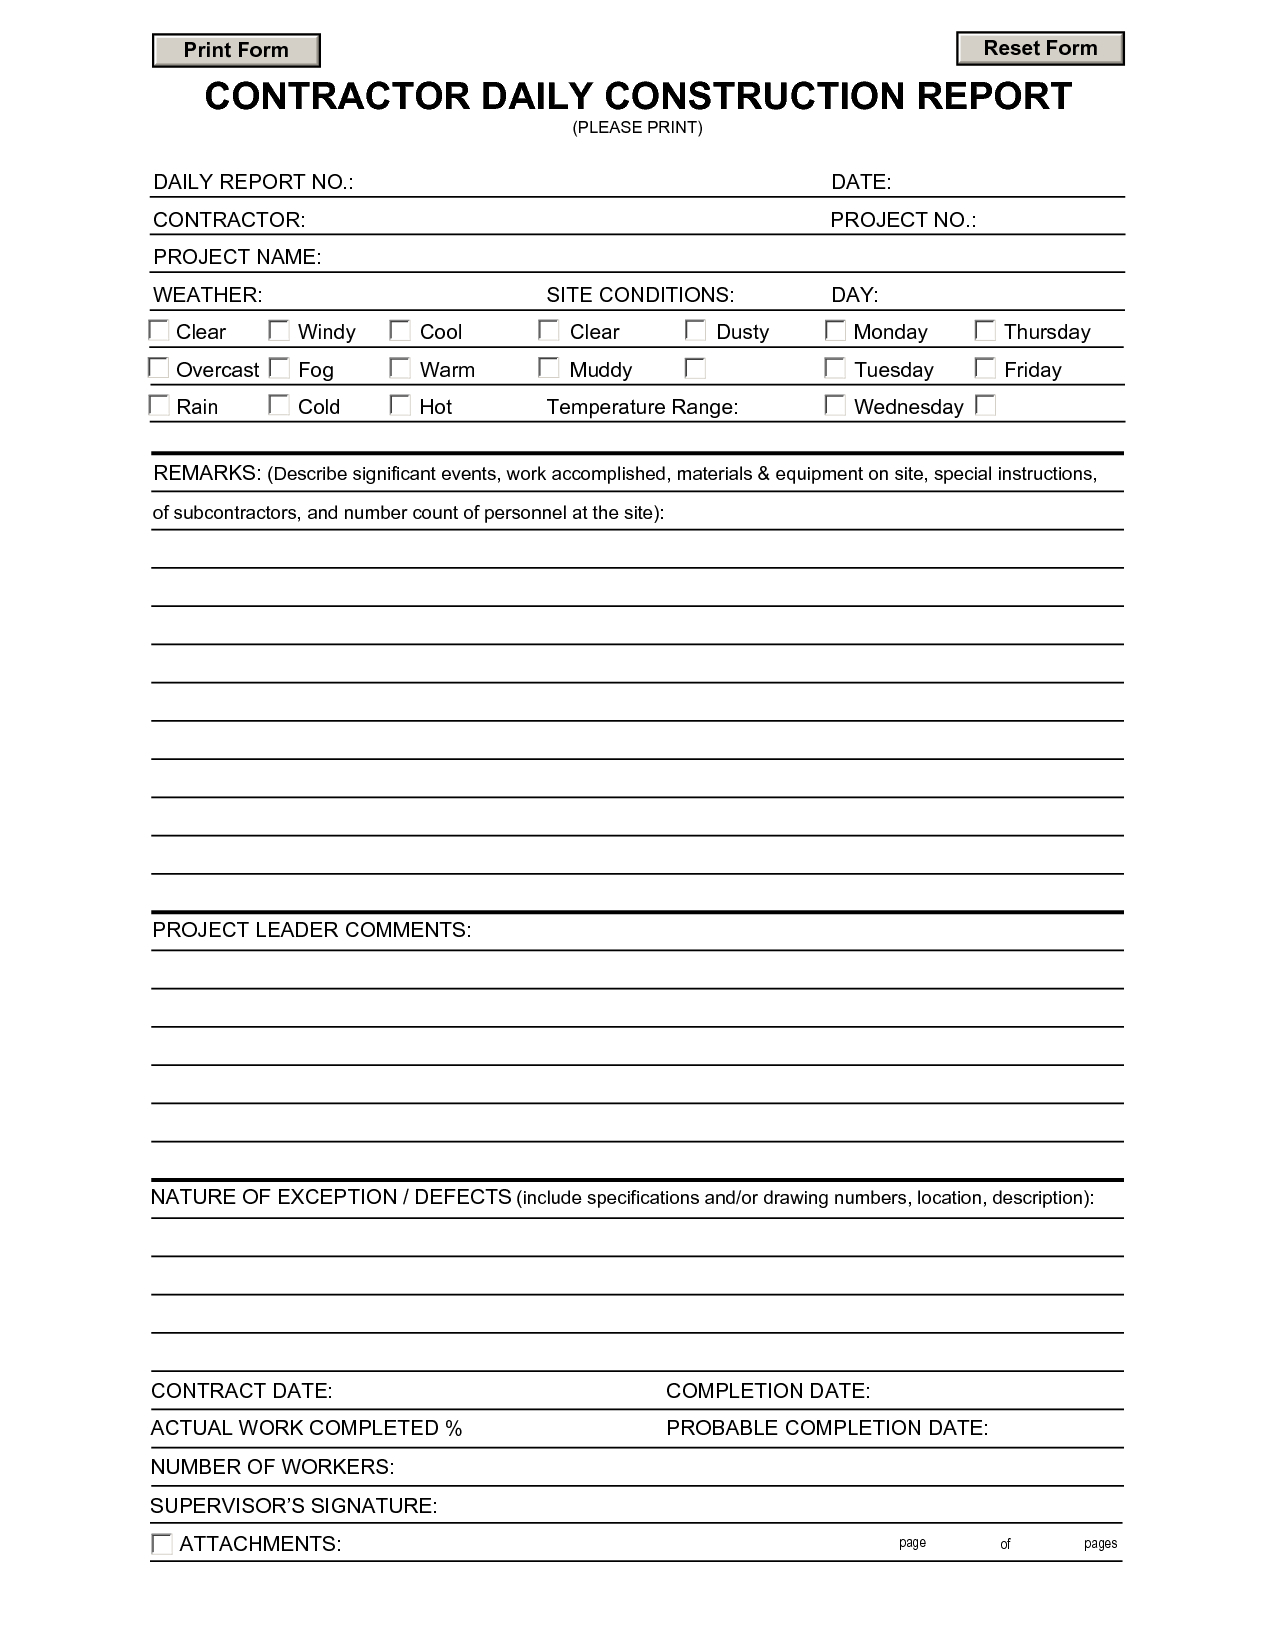 Construction Daily Report Template | Contractors | Report With Regard To Construction Deficiency Report Template